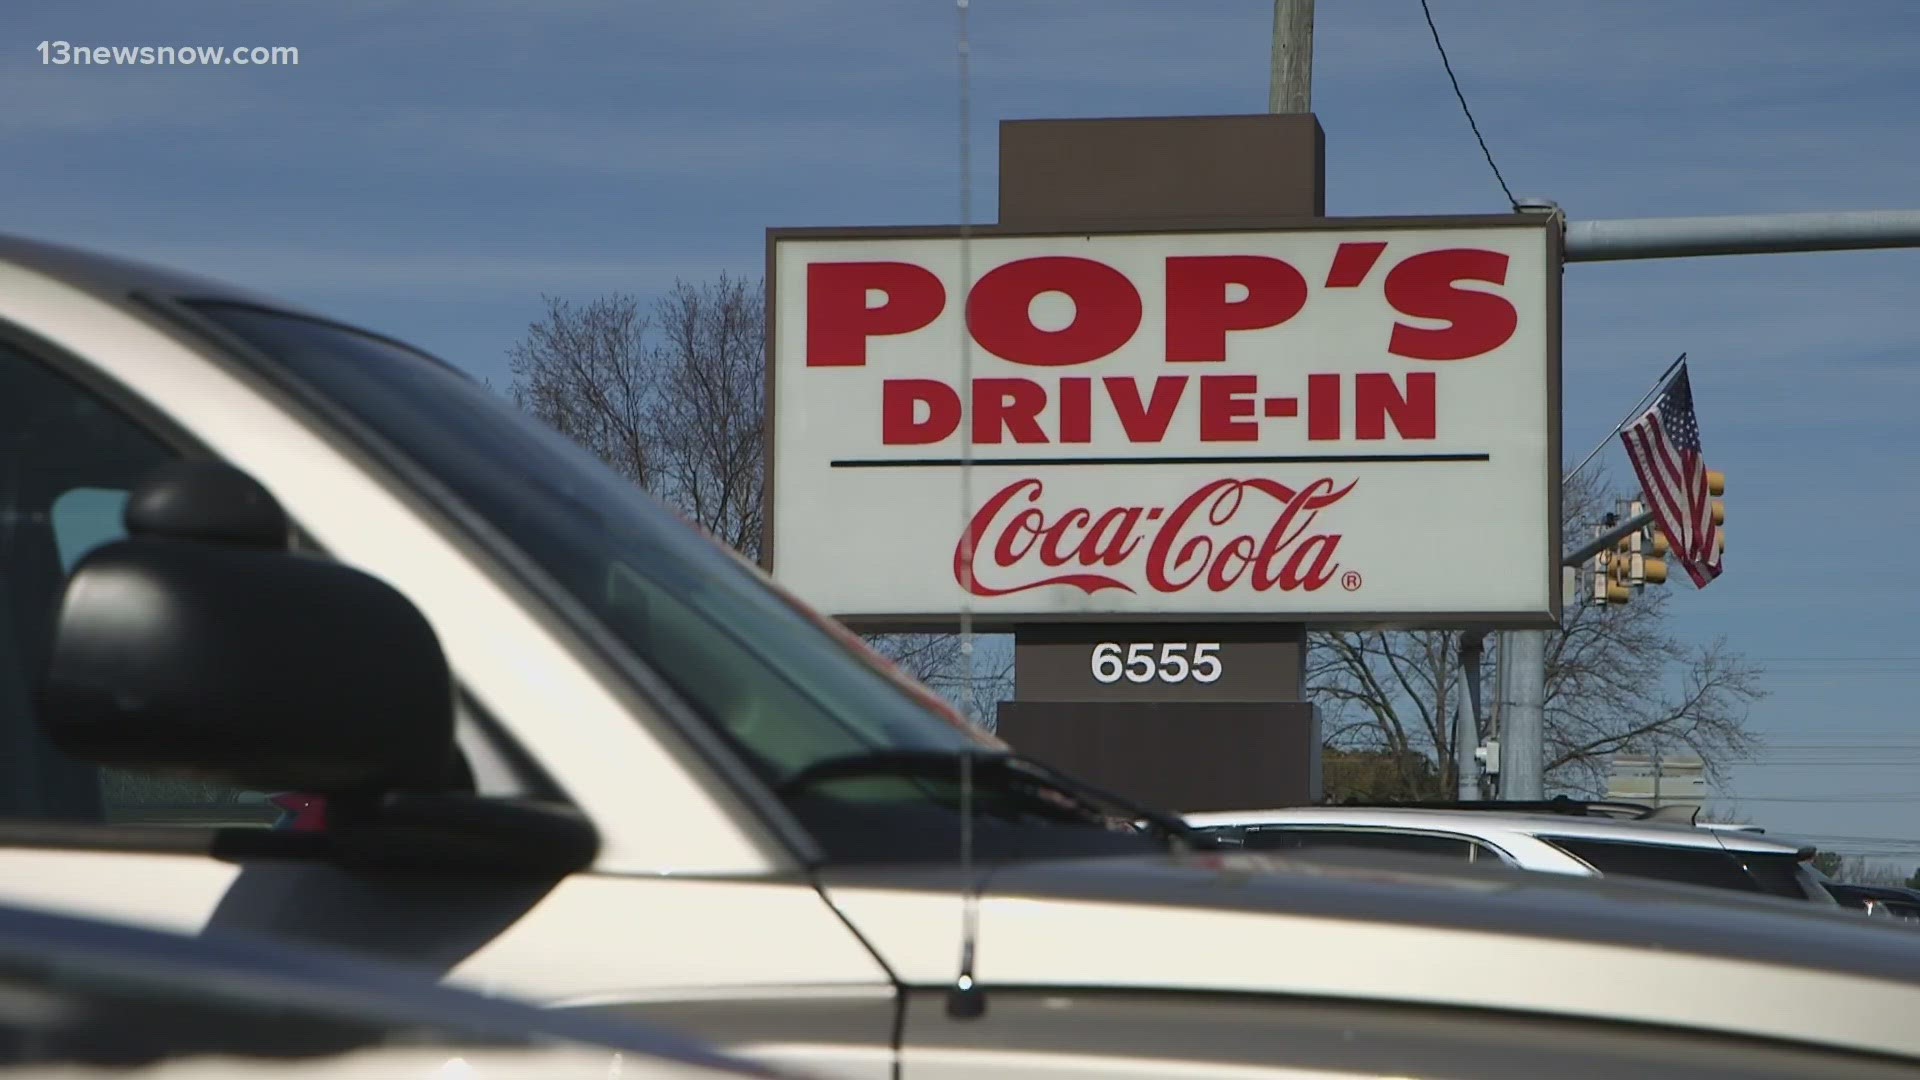 The Allen family, who owned and operated Pop's for almost 50 years, is moving on to a new chapter of their lives.